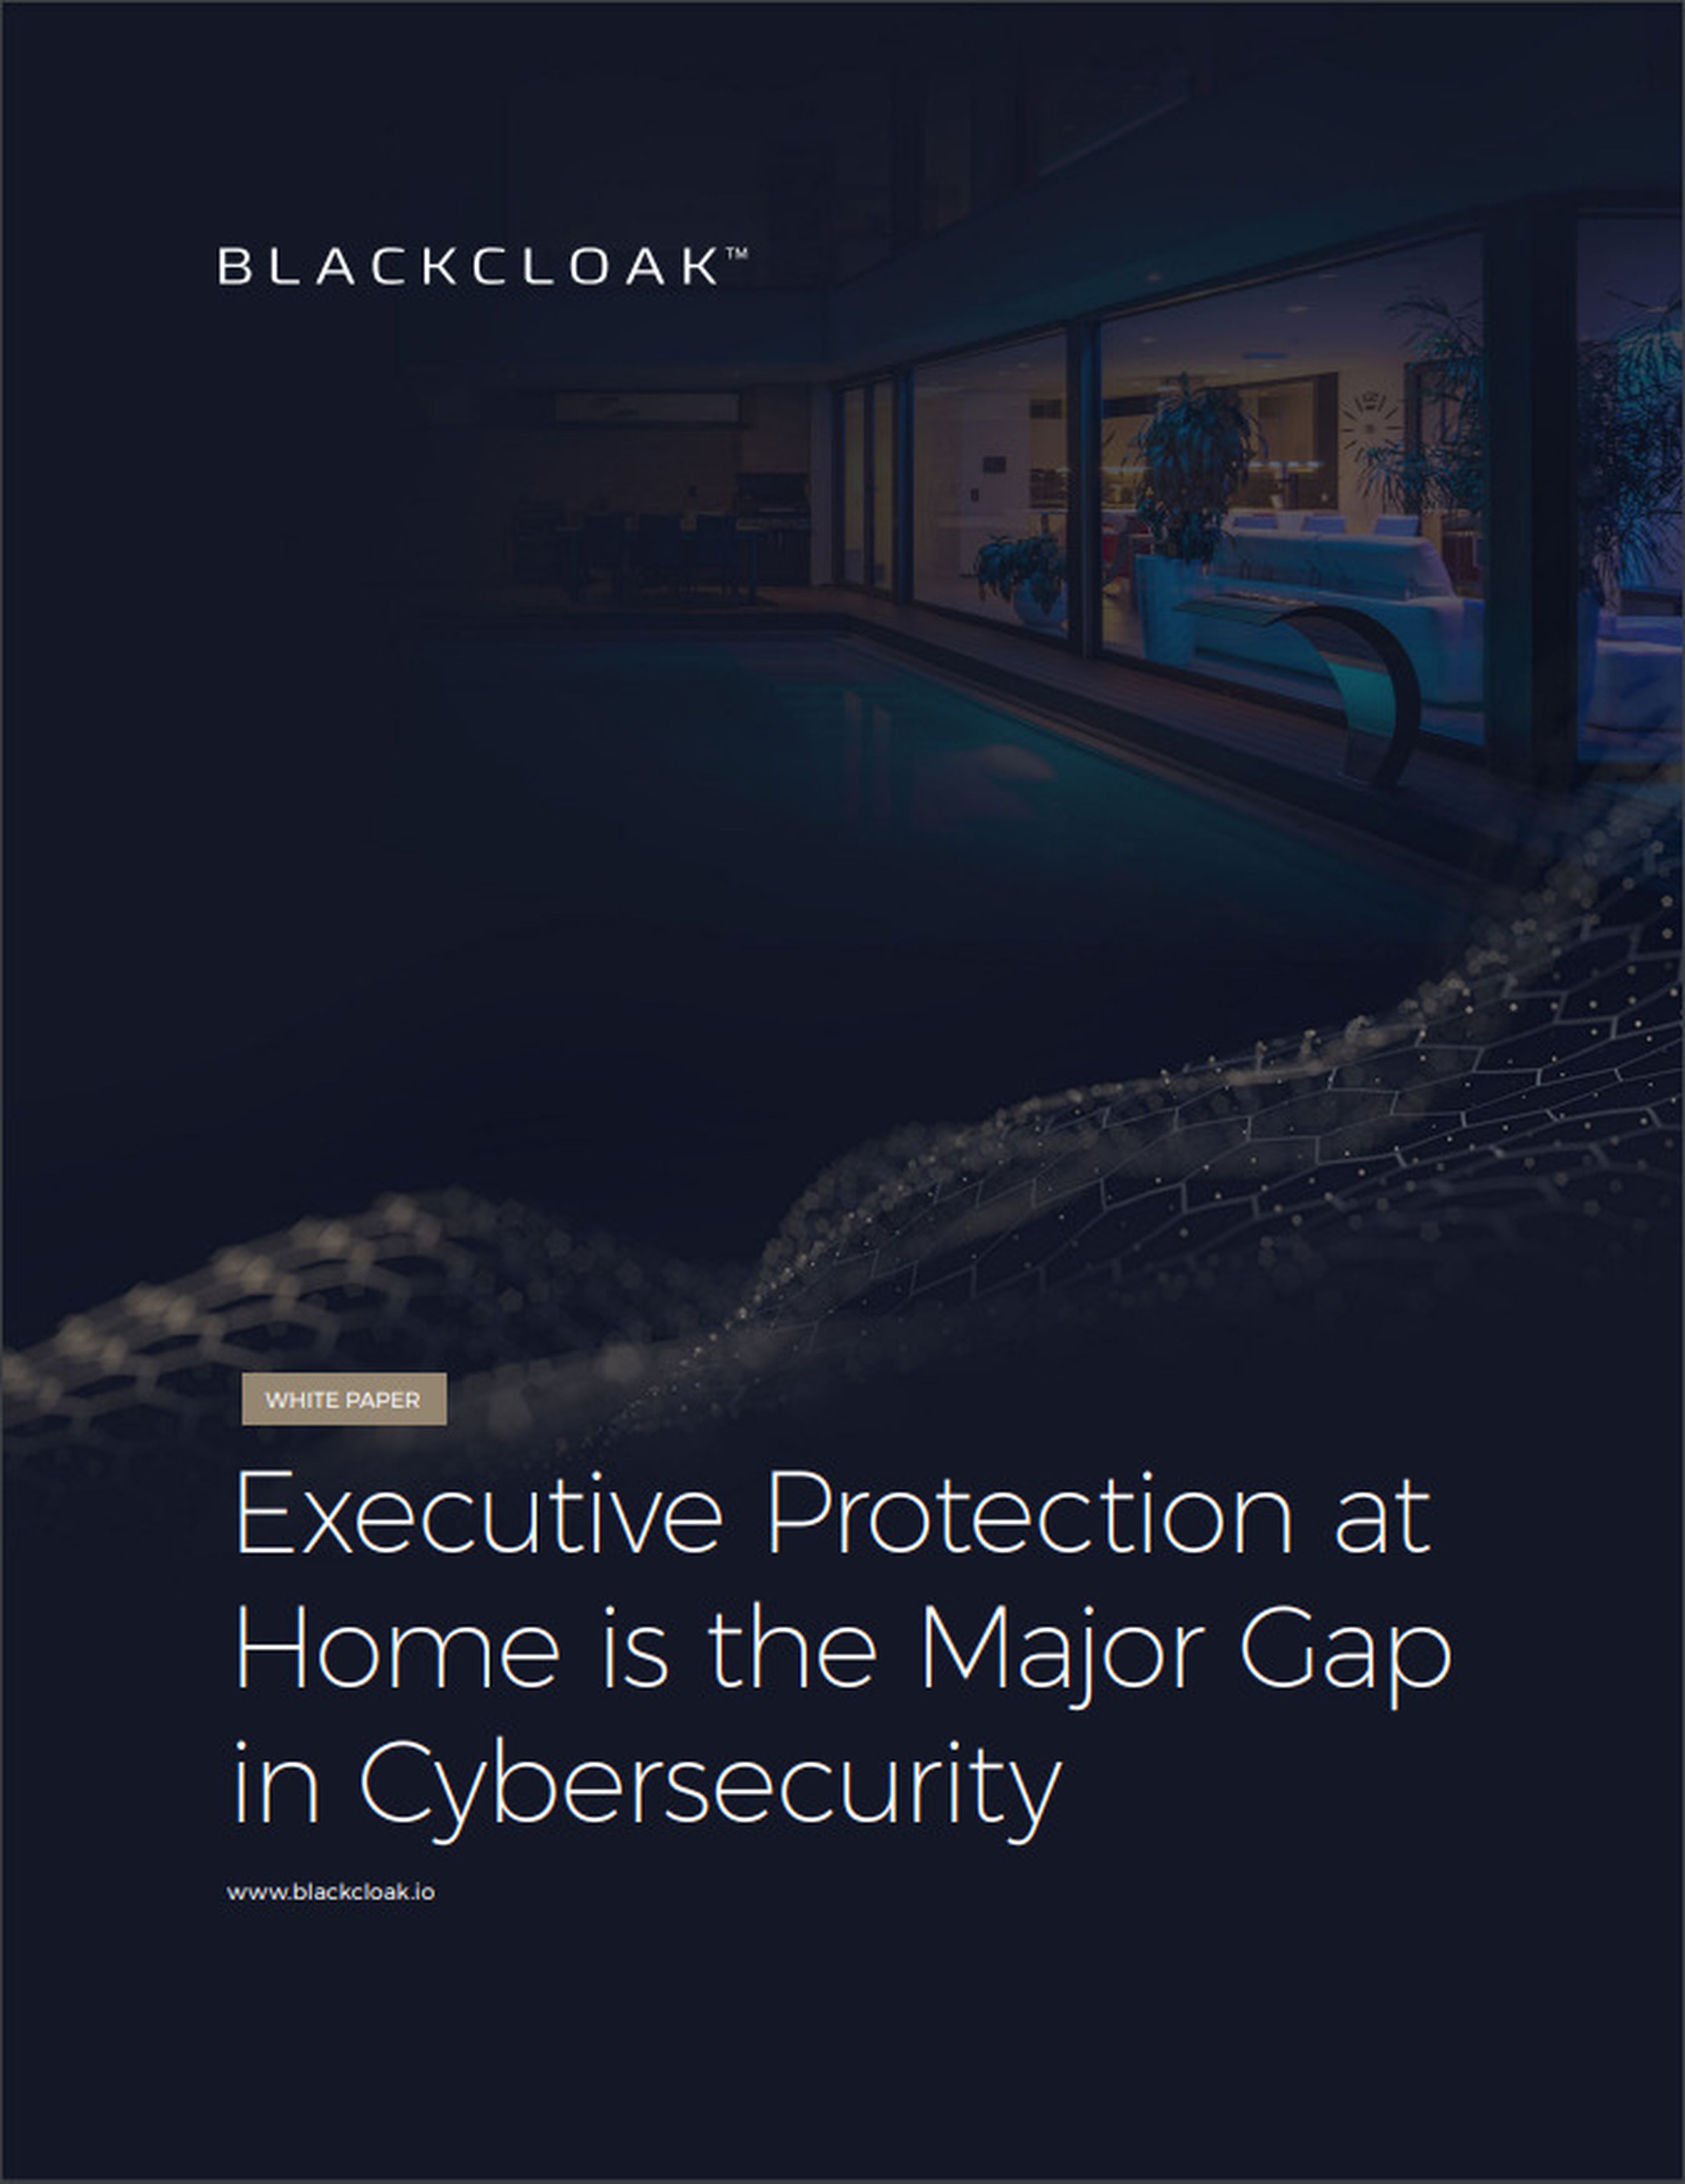 Executive Protection at Home is the Major Gap in Cybersecurity